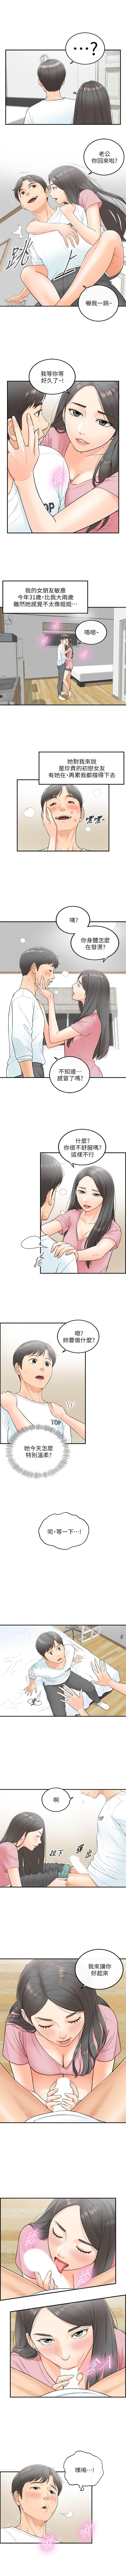 Sis 正妹小主管 1-54 官方中文（連載中） Ride - Page 5